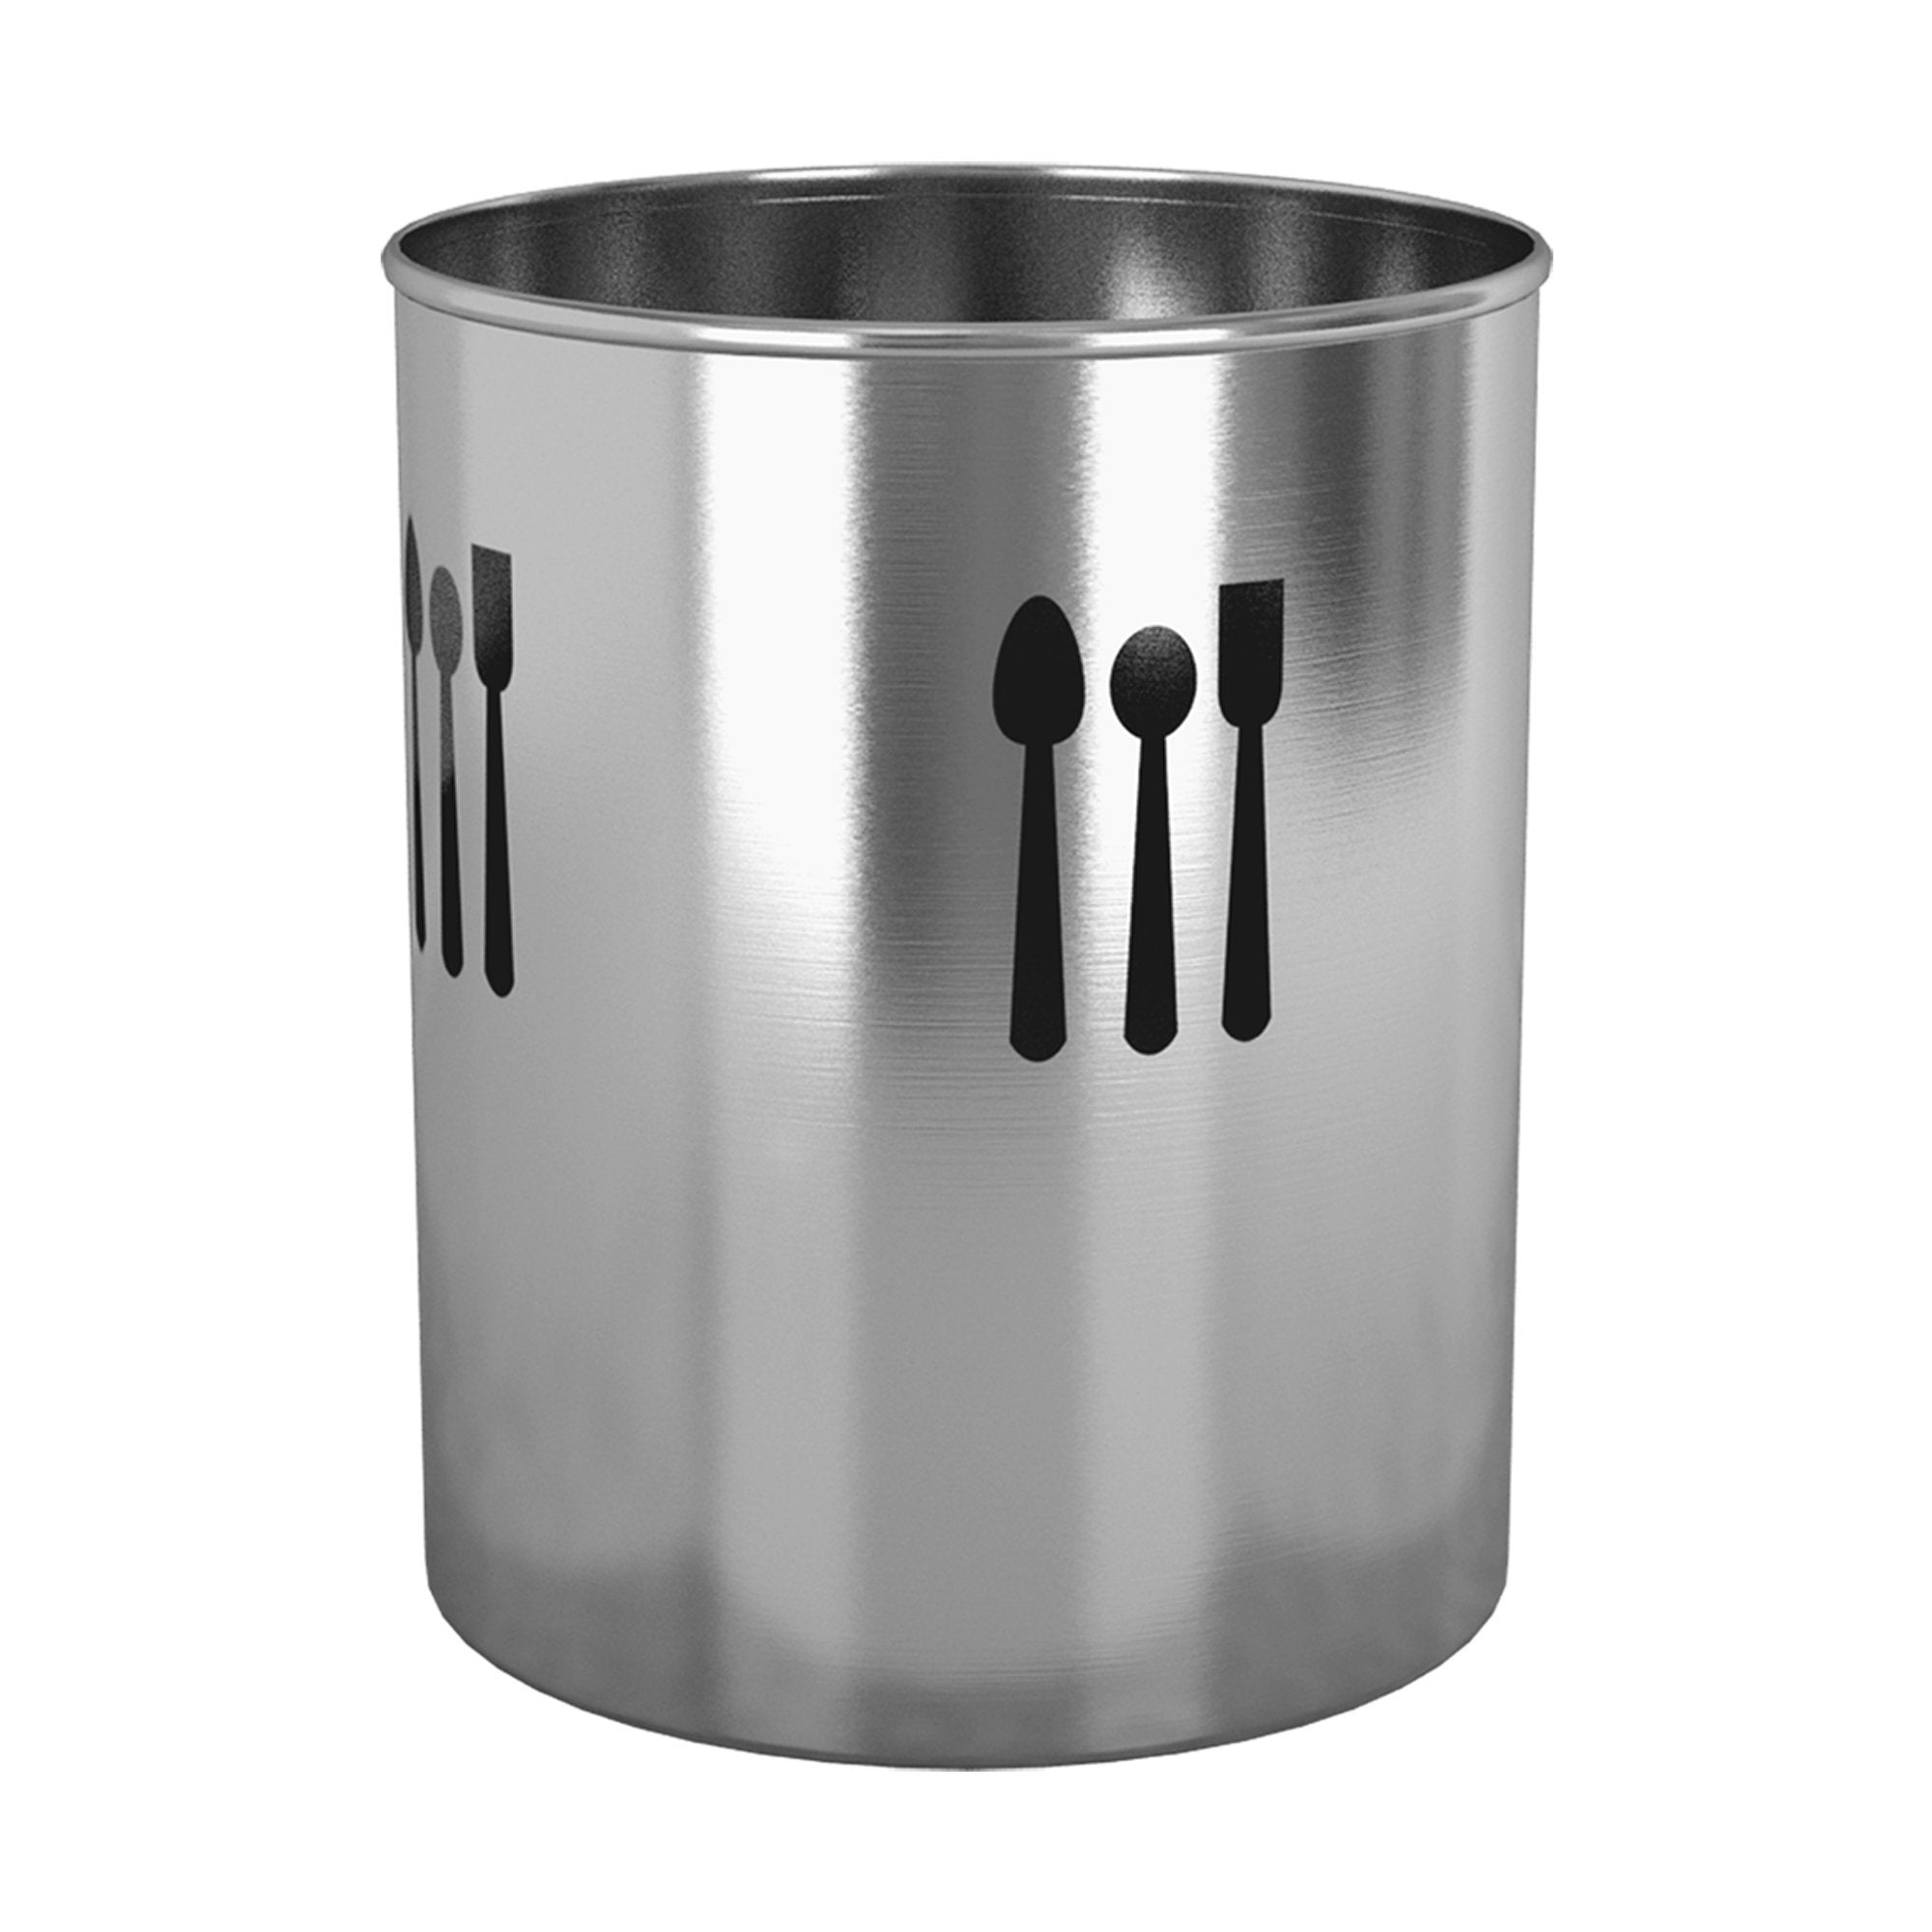 nu steel TG-UH-16 Utensils Holder Finish with Cutout 4 Qtr. (Spoon), 7.5'' H X 7.5'' W X 7.5'' D, Brushed